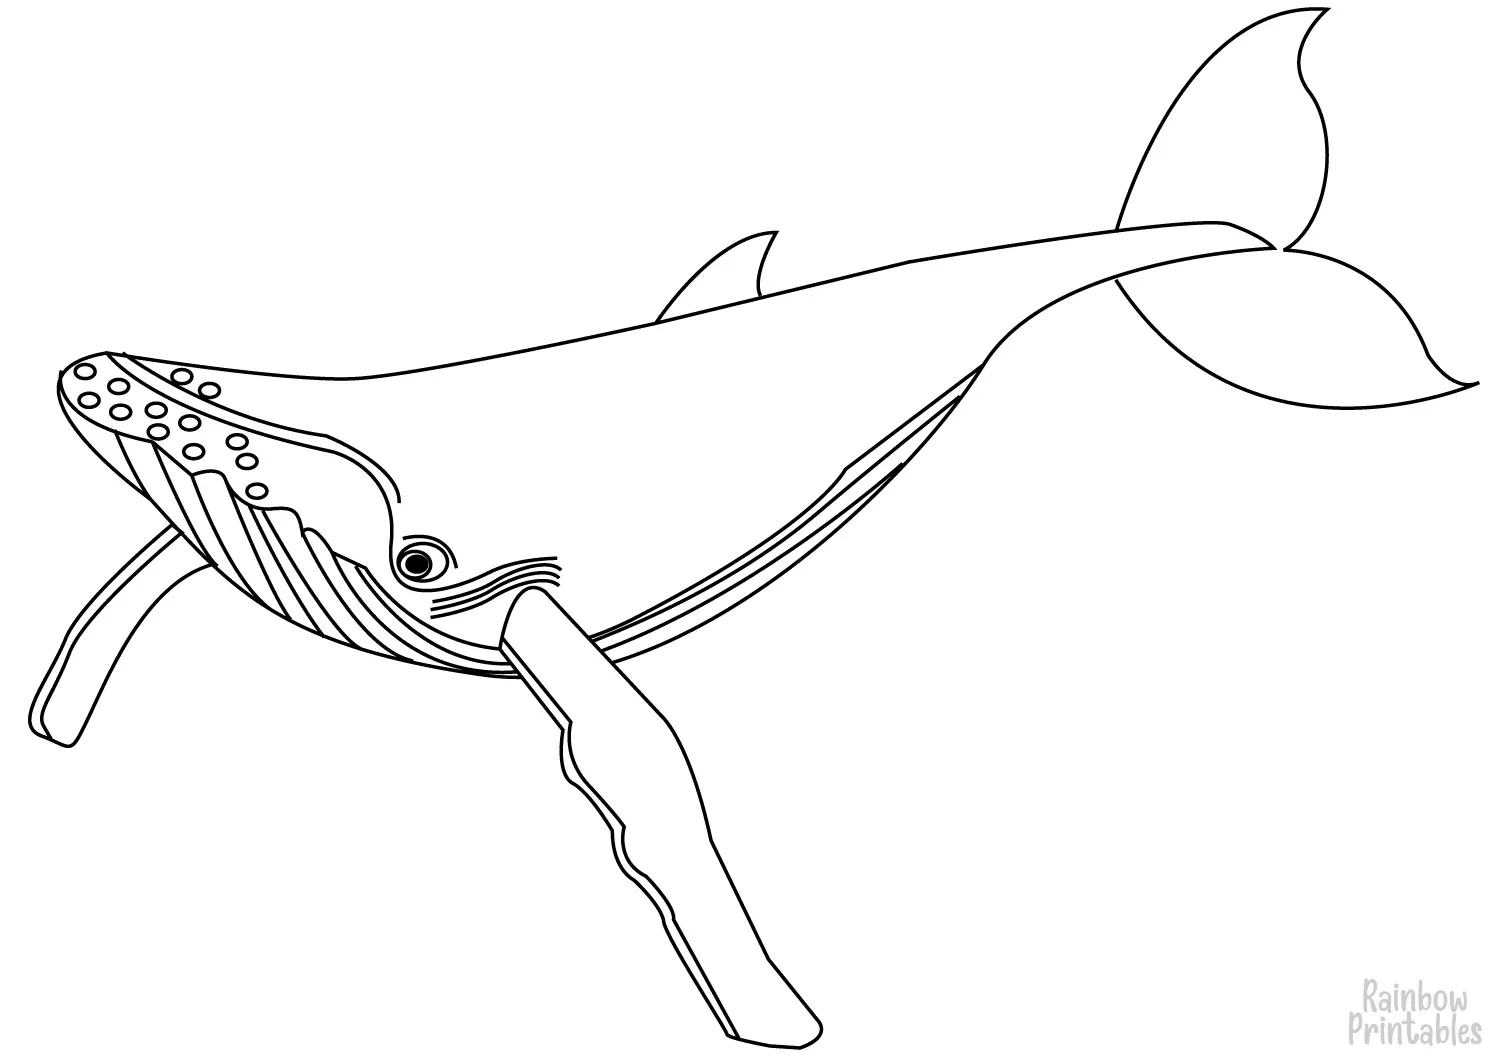 SIMPLE-EASY-line-drawings-WHALE-cartoon-coloring-page-for-kids